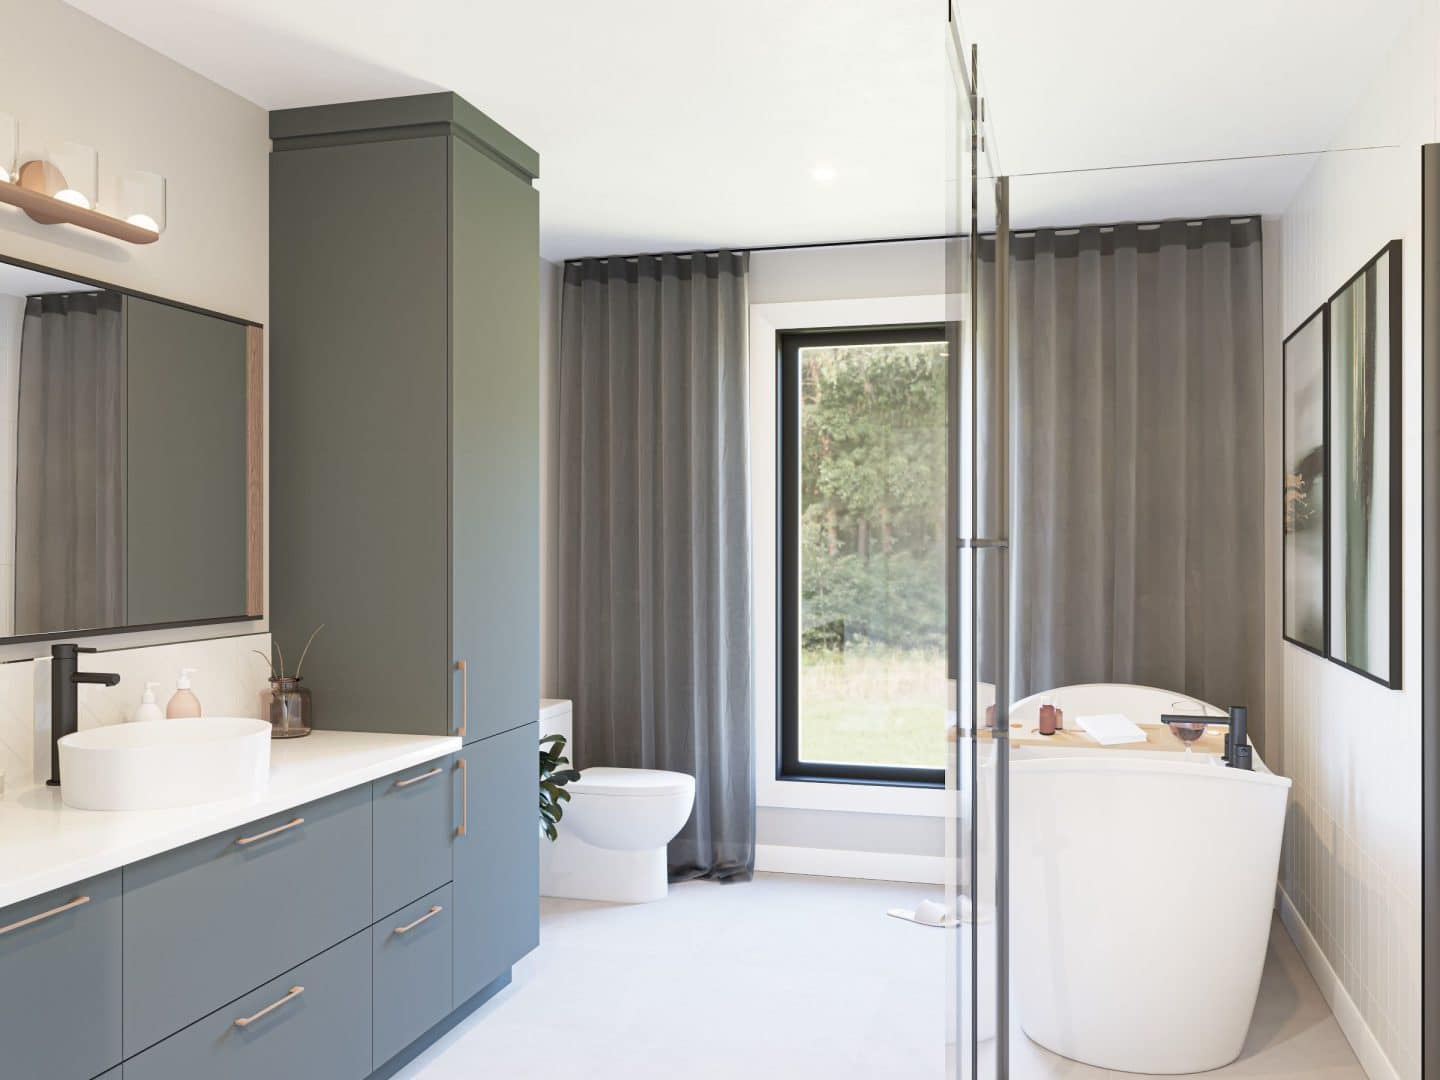 The Citana model is a contemporary single-storey home. View of the bathroom.